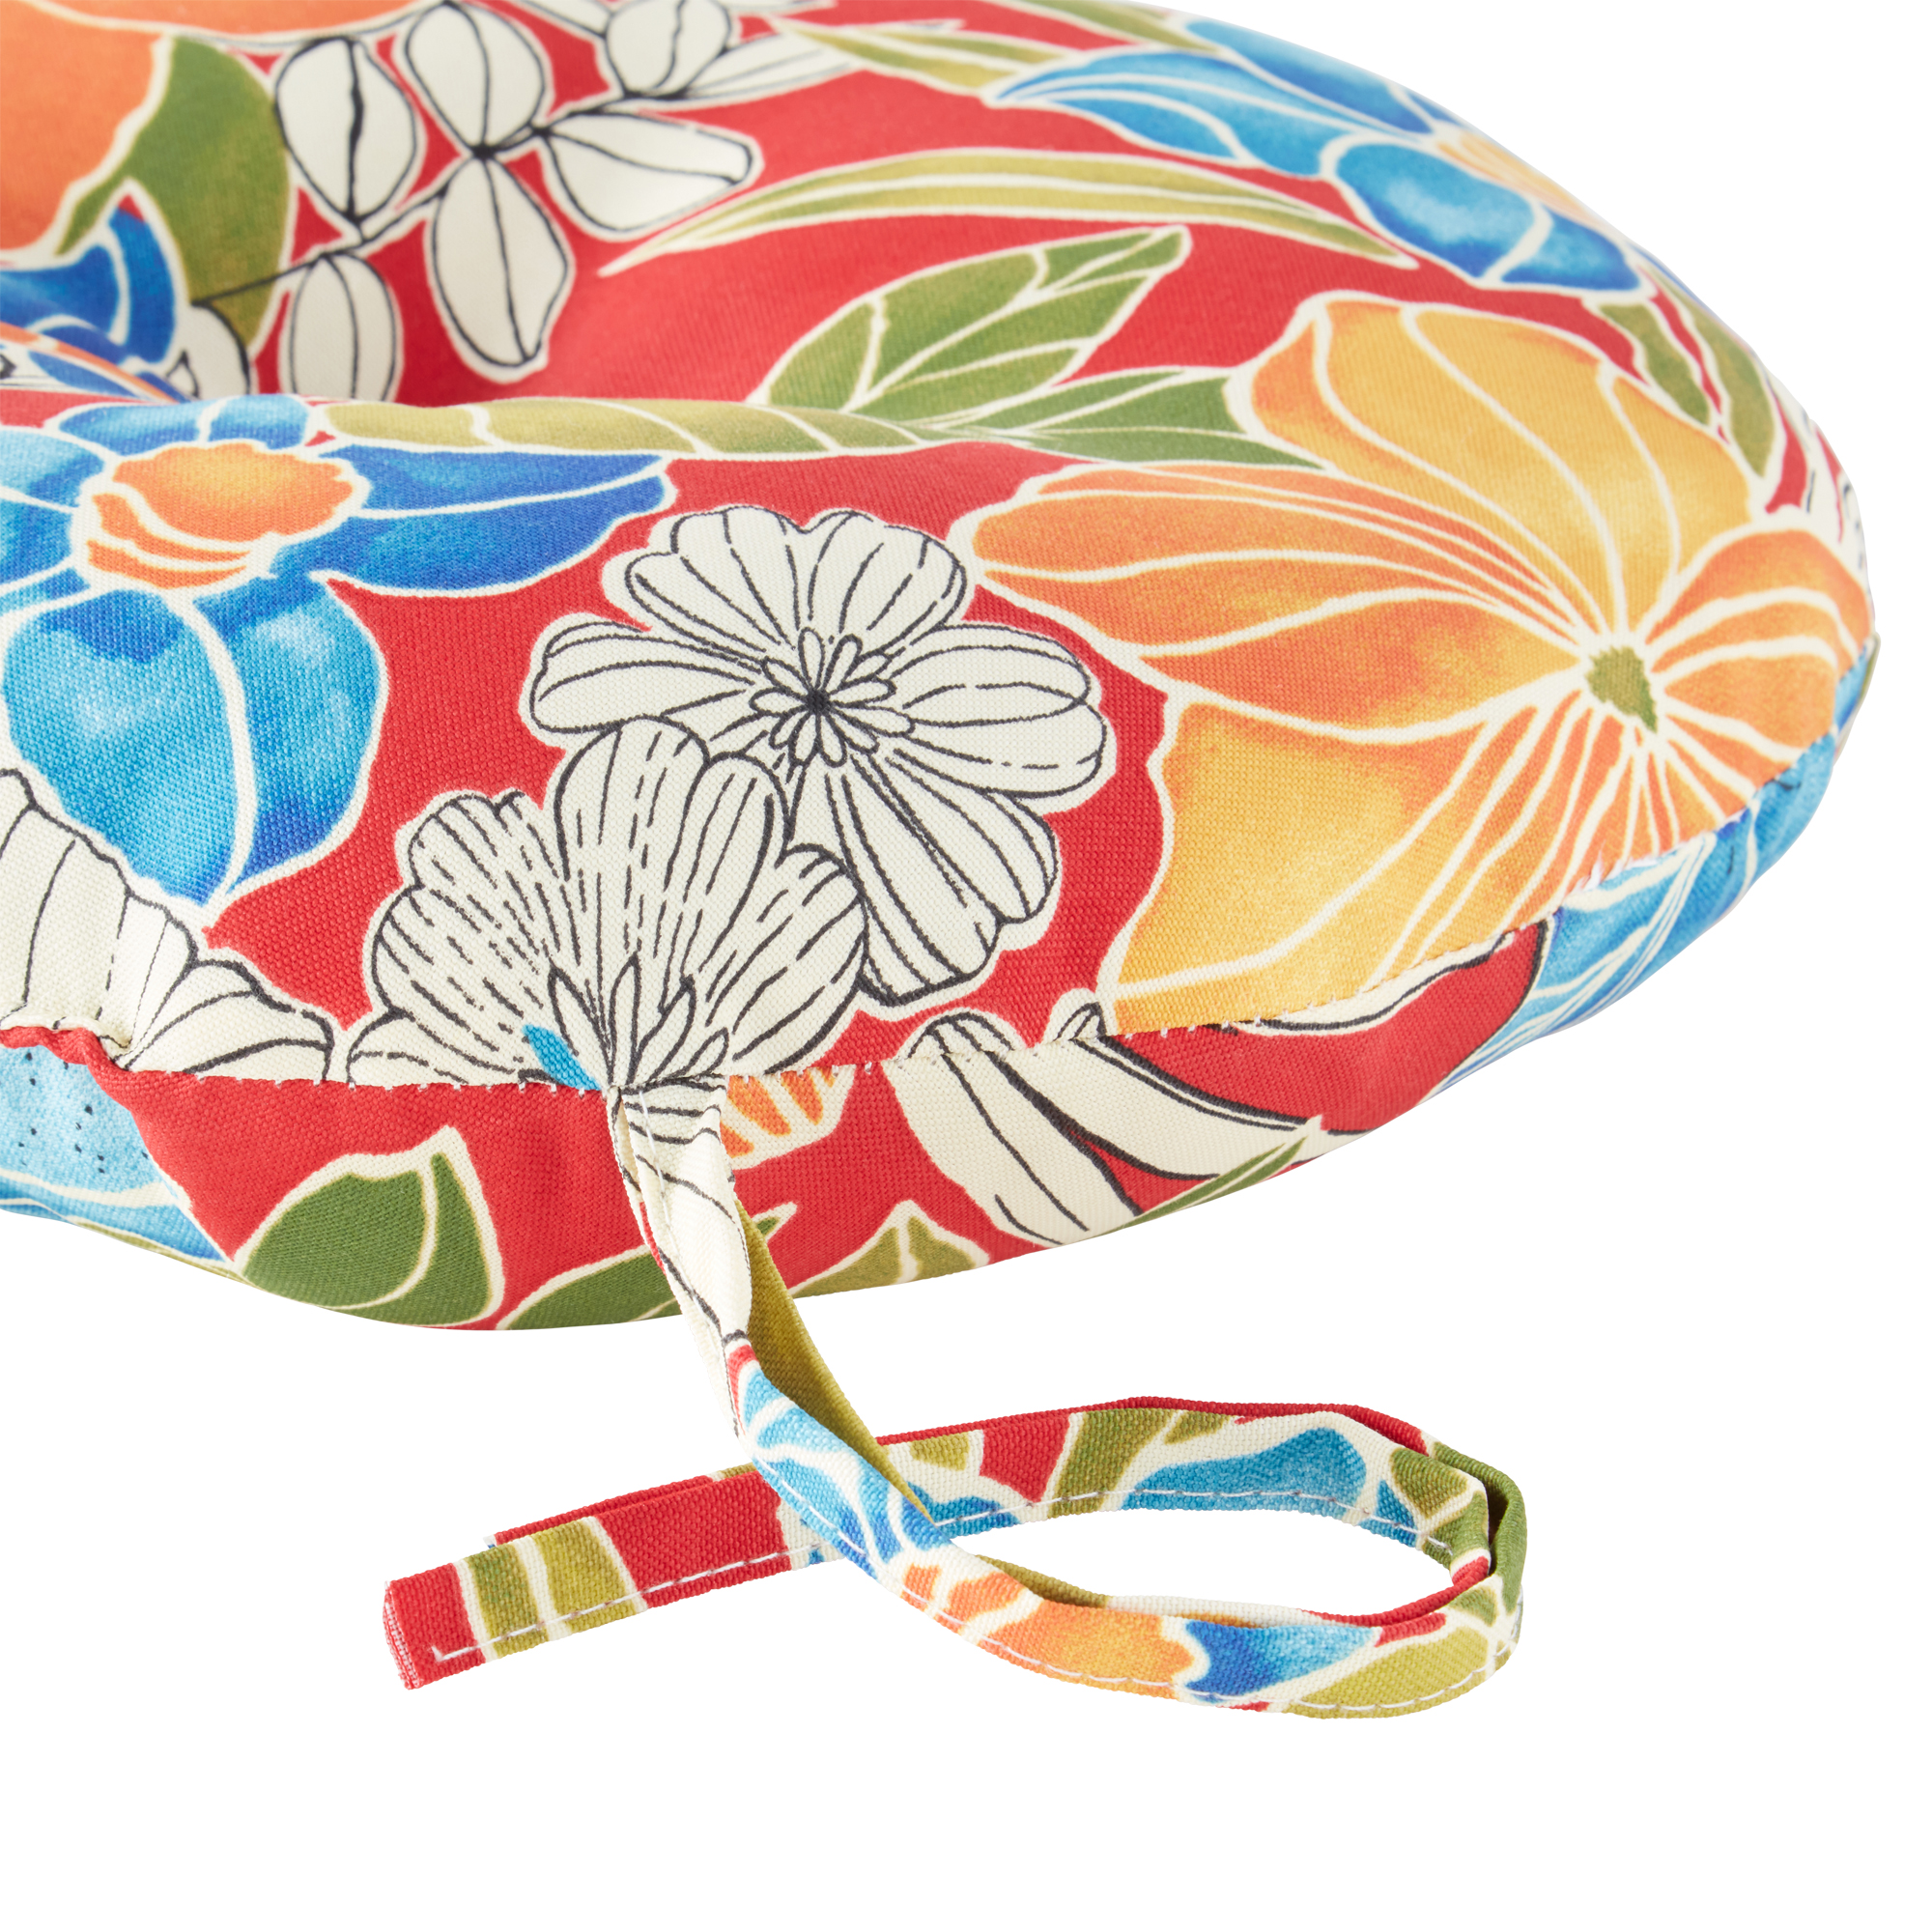 Greendale Home Fashions Aloha Red Floral 15 in. Round Outdoor Reversible Bistro Seat Cushion (Set of 2) - image 3 of 5